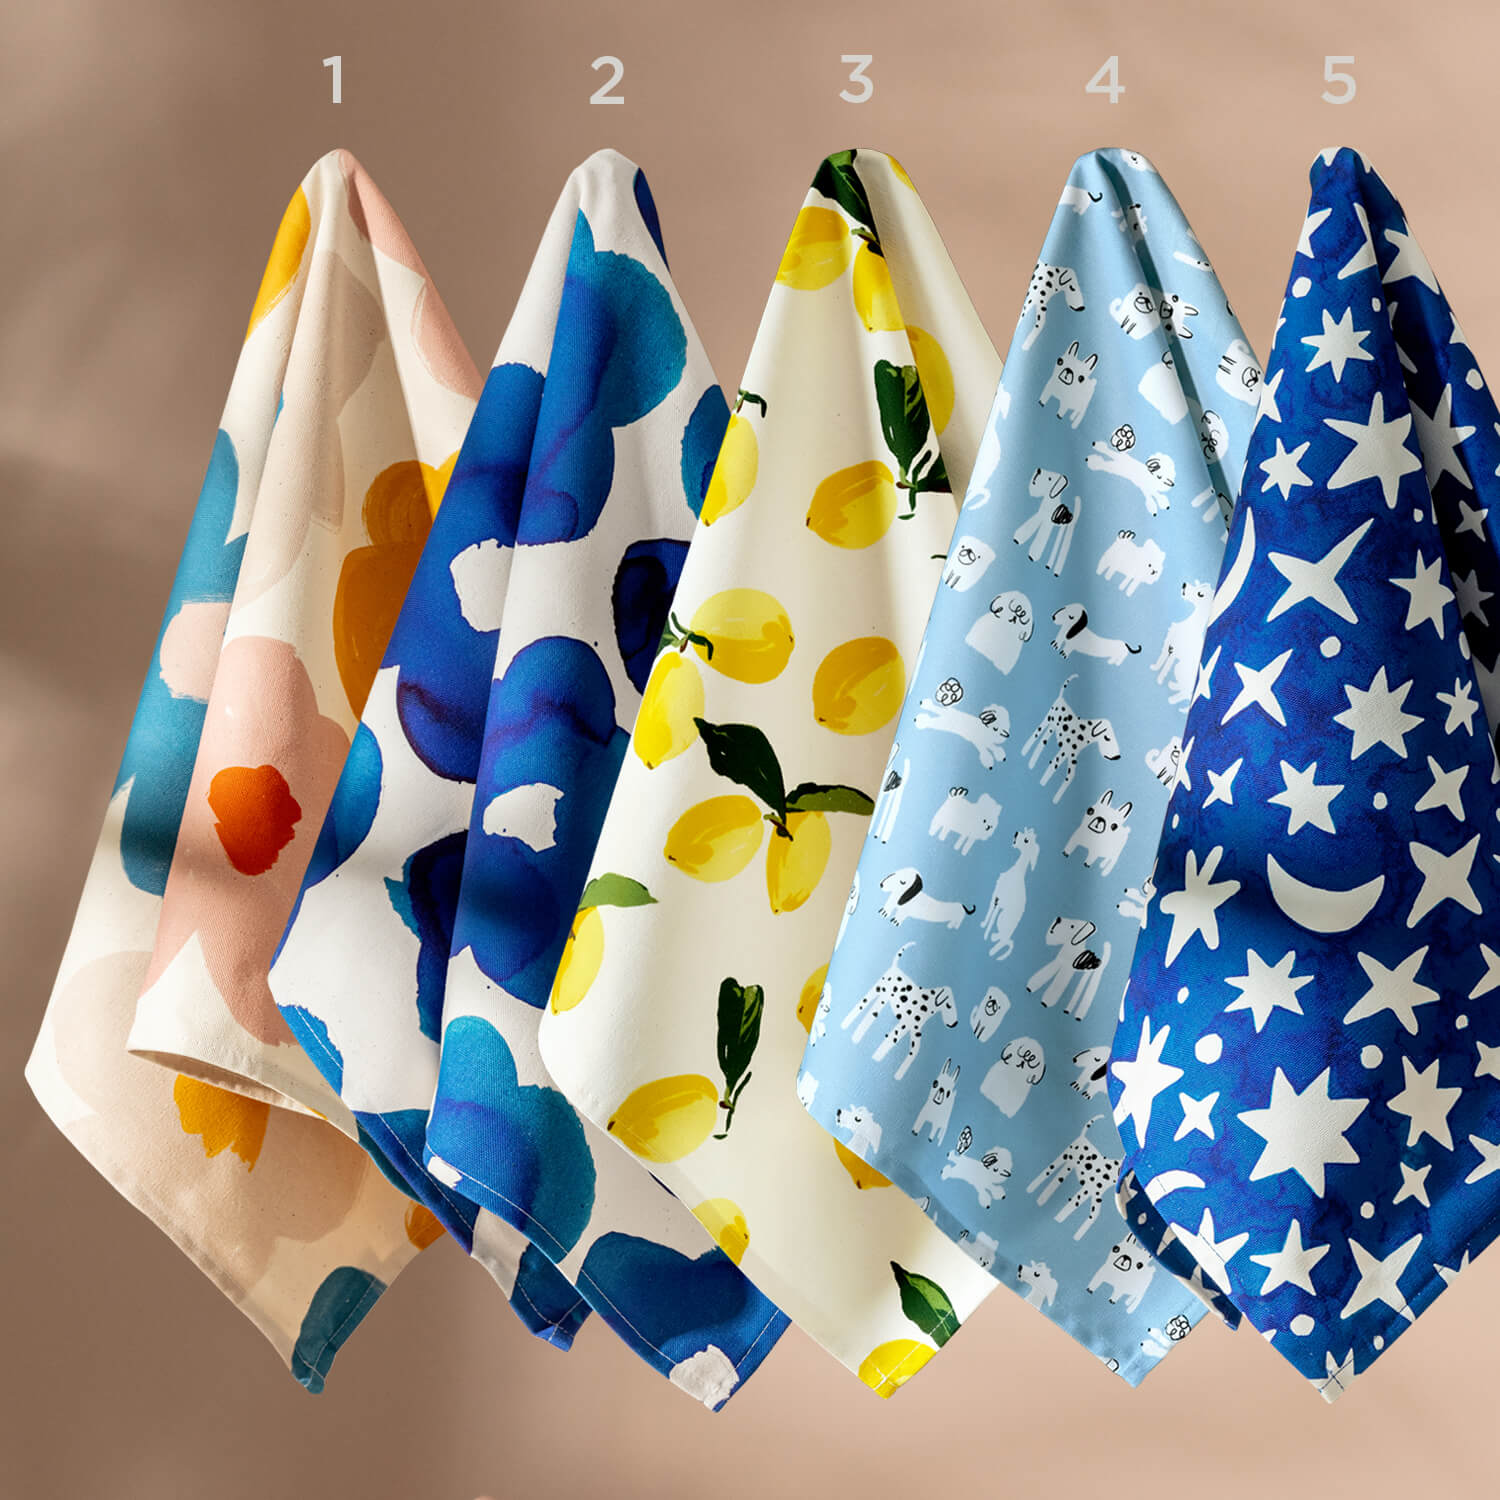 Tea Towel Designs - Floral, Blue Floral, Lemon, Dogs and Stars for the Happy New Home Letterbox Gift